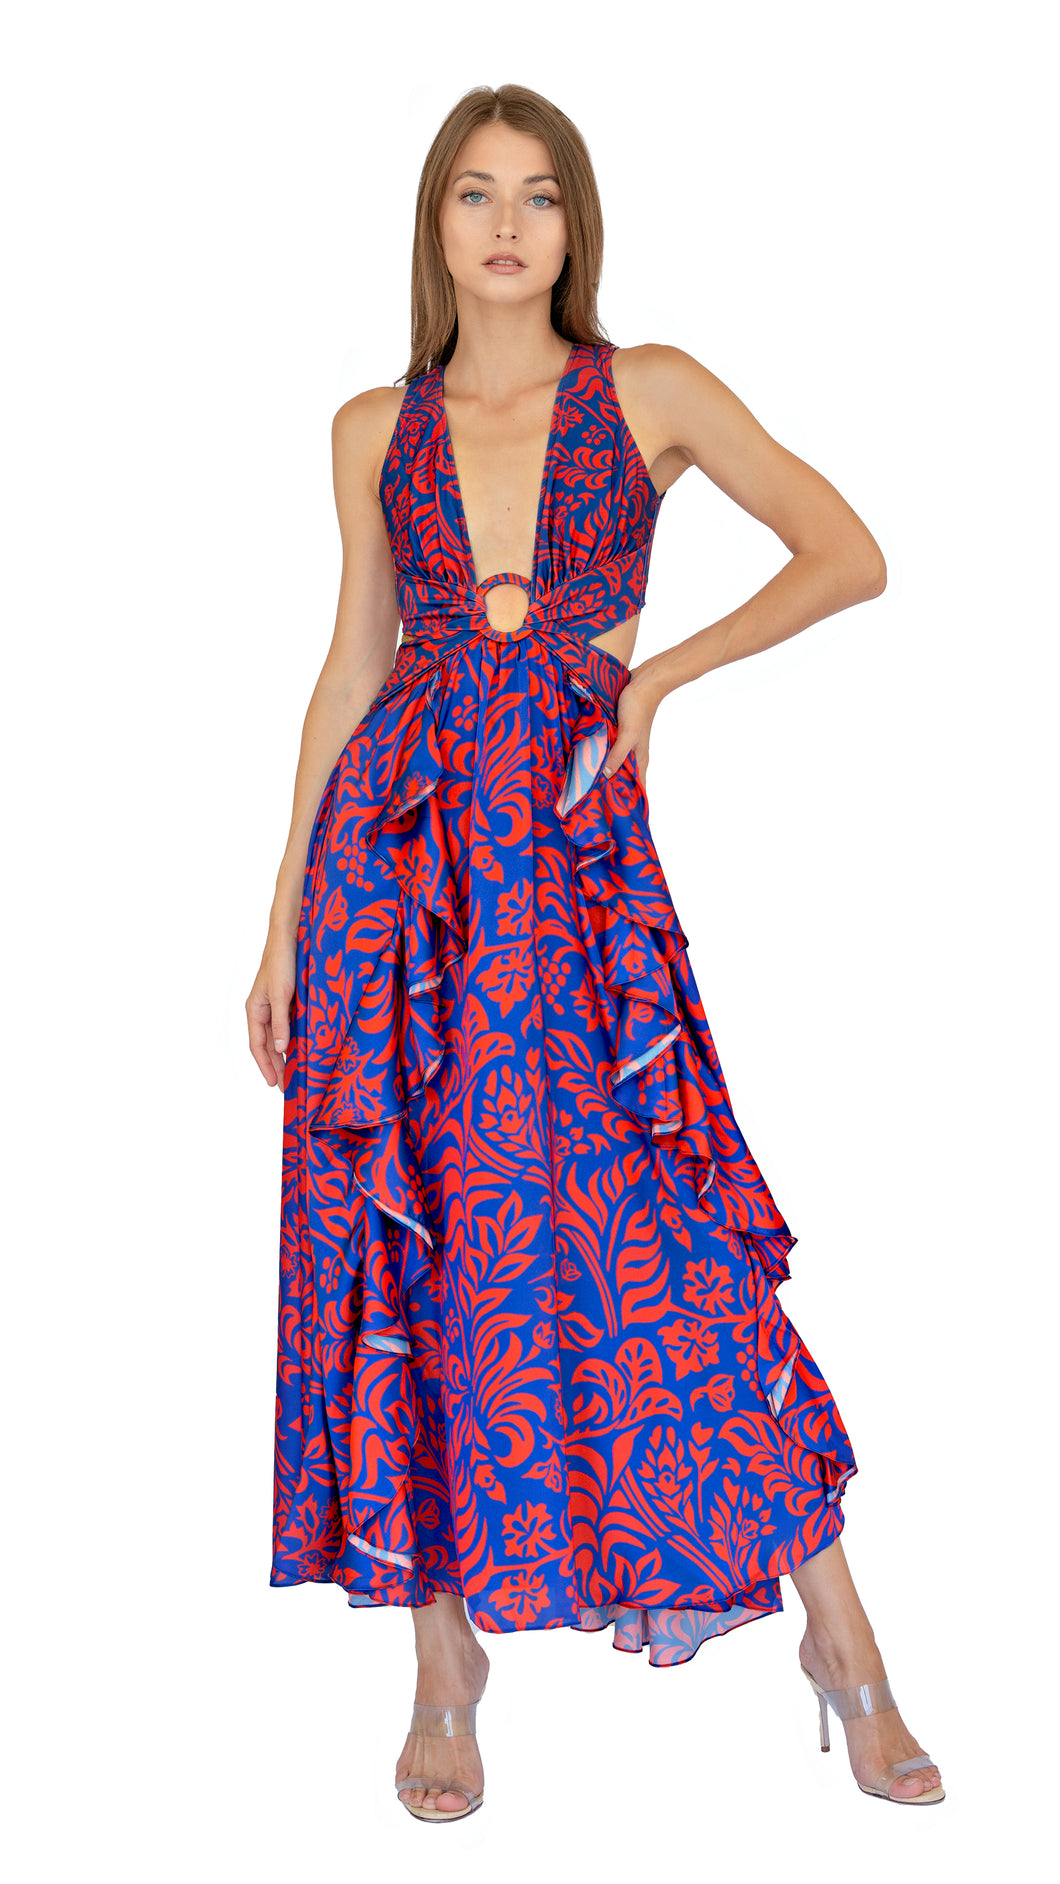 Patbo dress - Plunging neckline with figure-flattering ribcage cut-outs. Fabric-covered ring detail at waist. Ankle-length skirt with two side slits. Adjustable tie back closure. Bodysuit has a bottom snap closure.